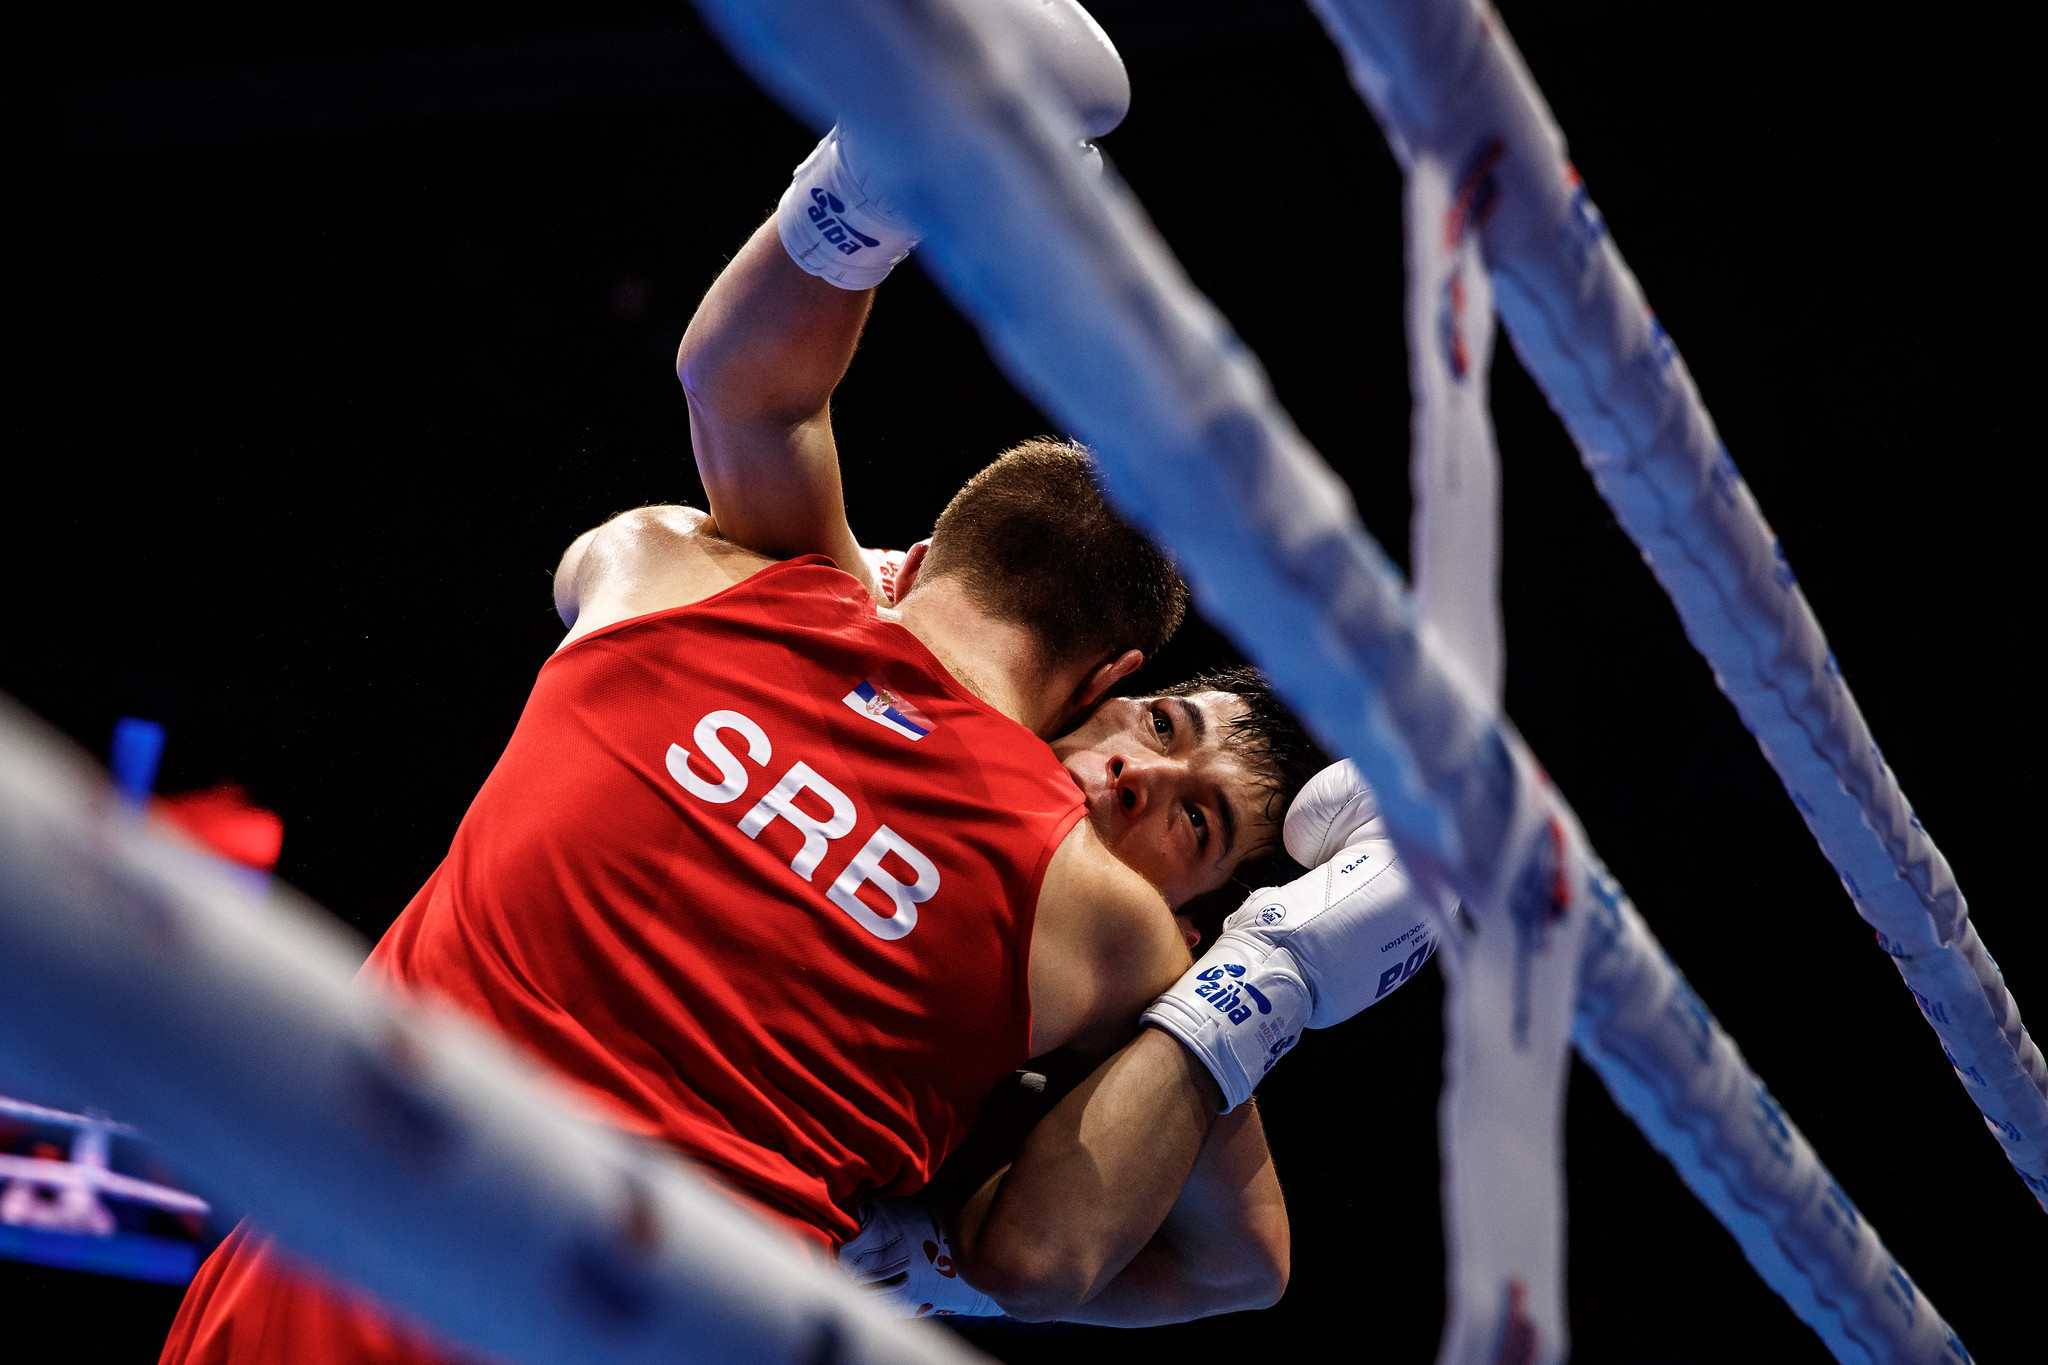 Hosts Serbia is guaranteed one medal at the Men's World Boxing Championships ©AIBA